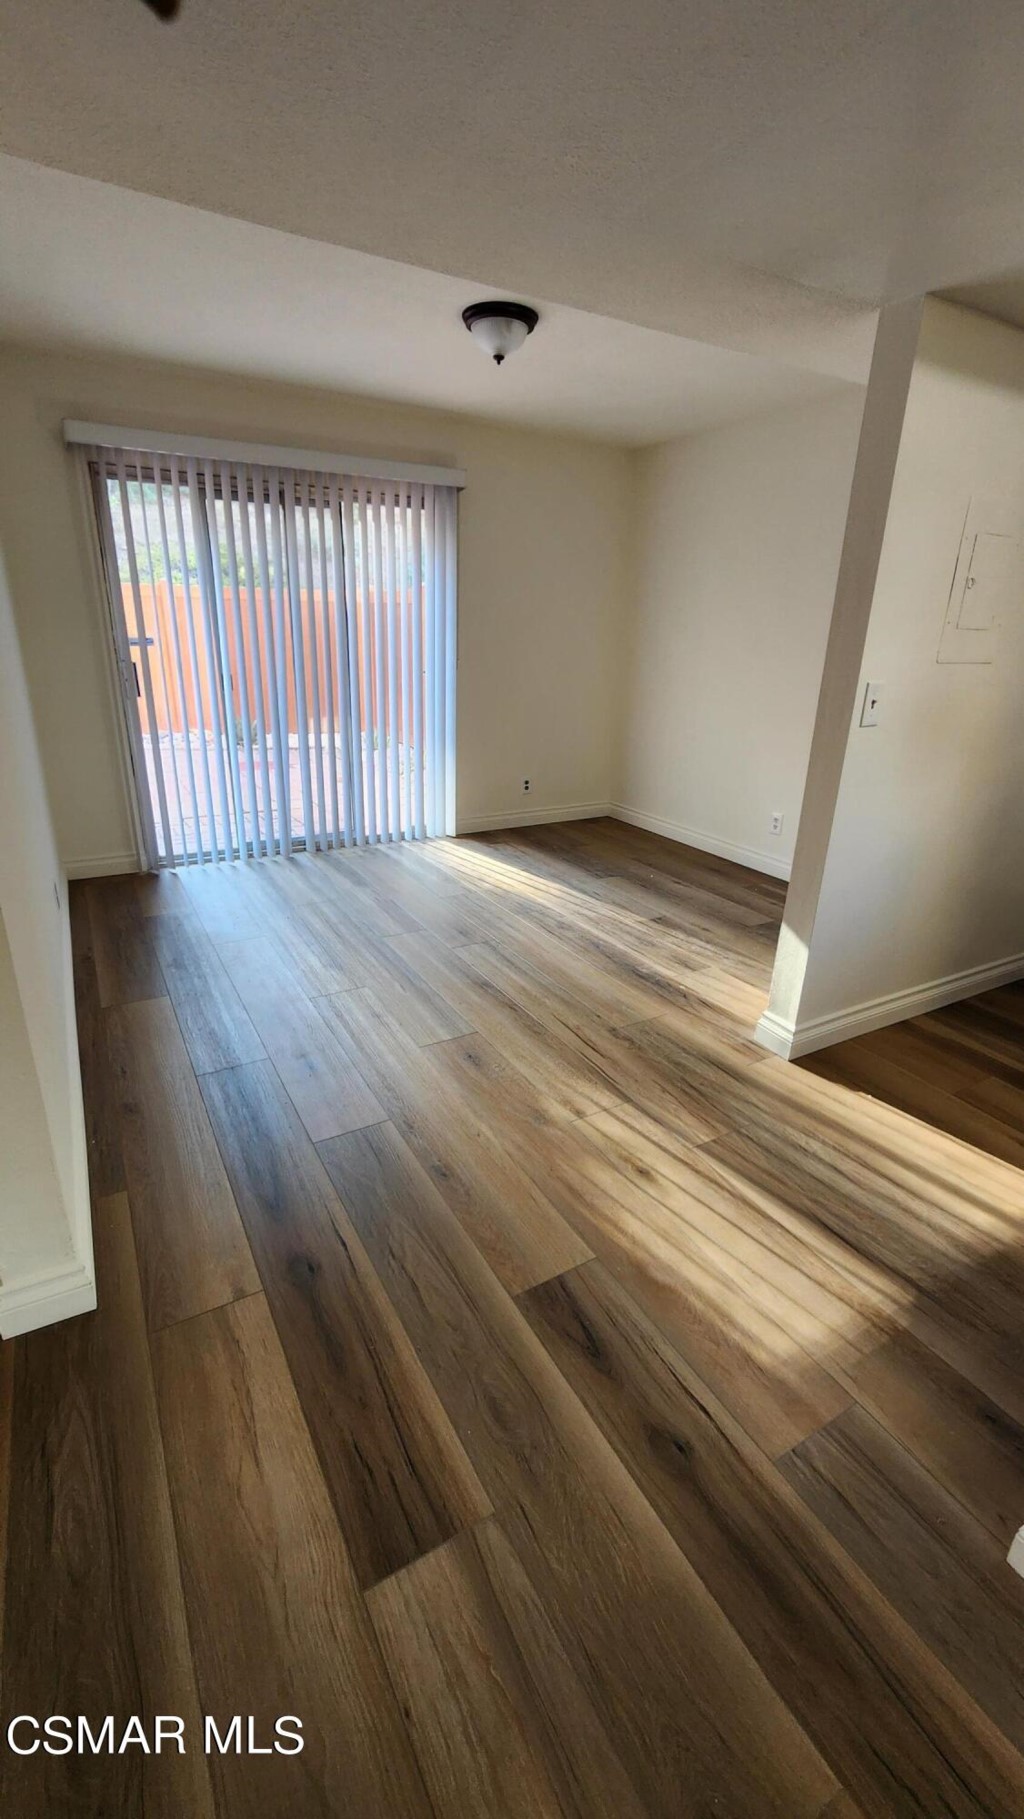 a view of a room has wooden floor